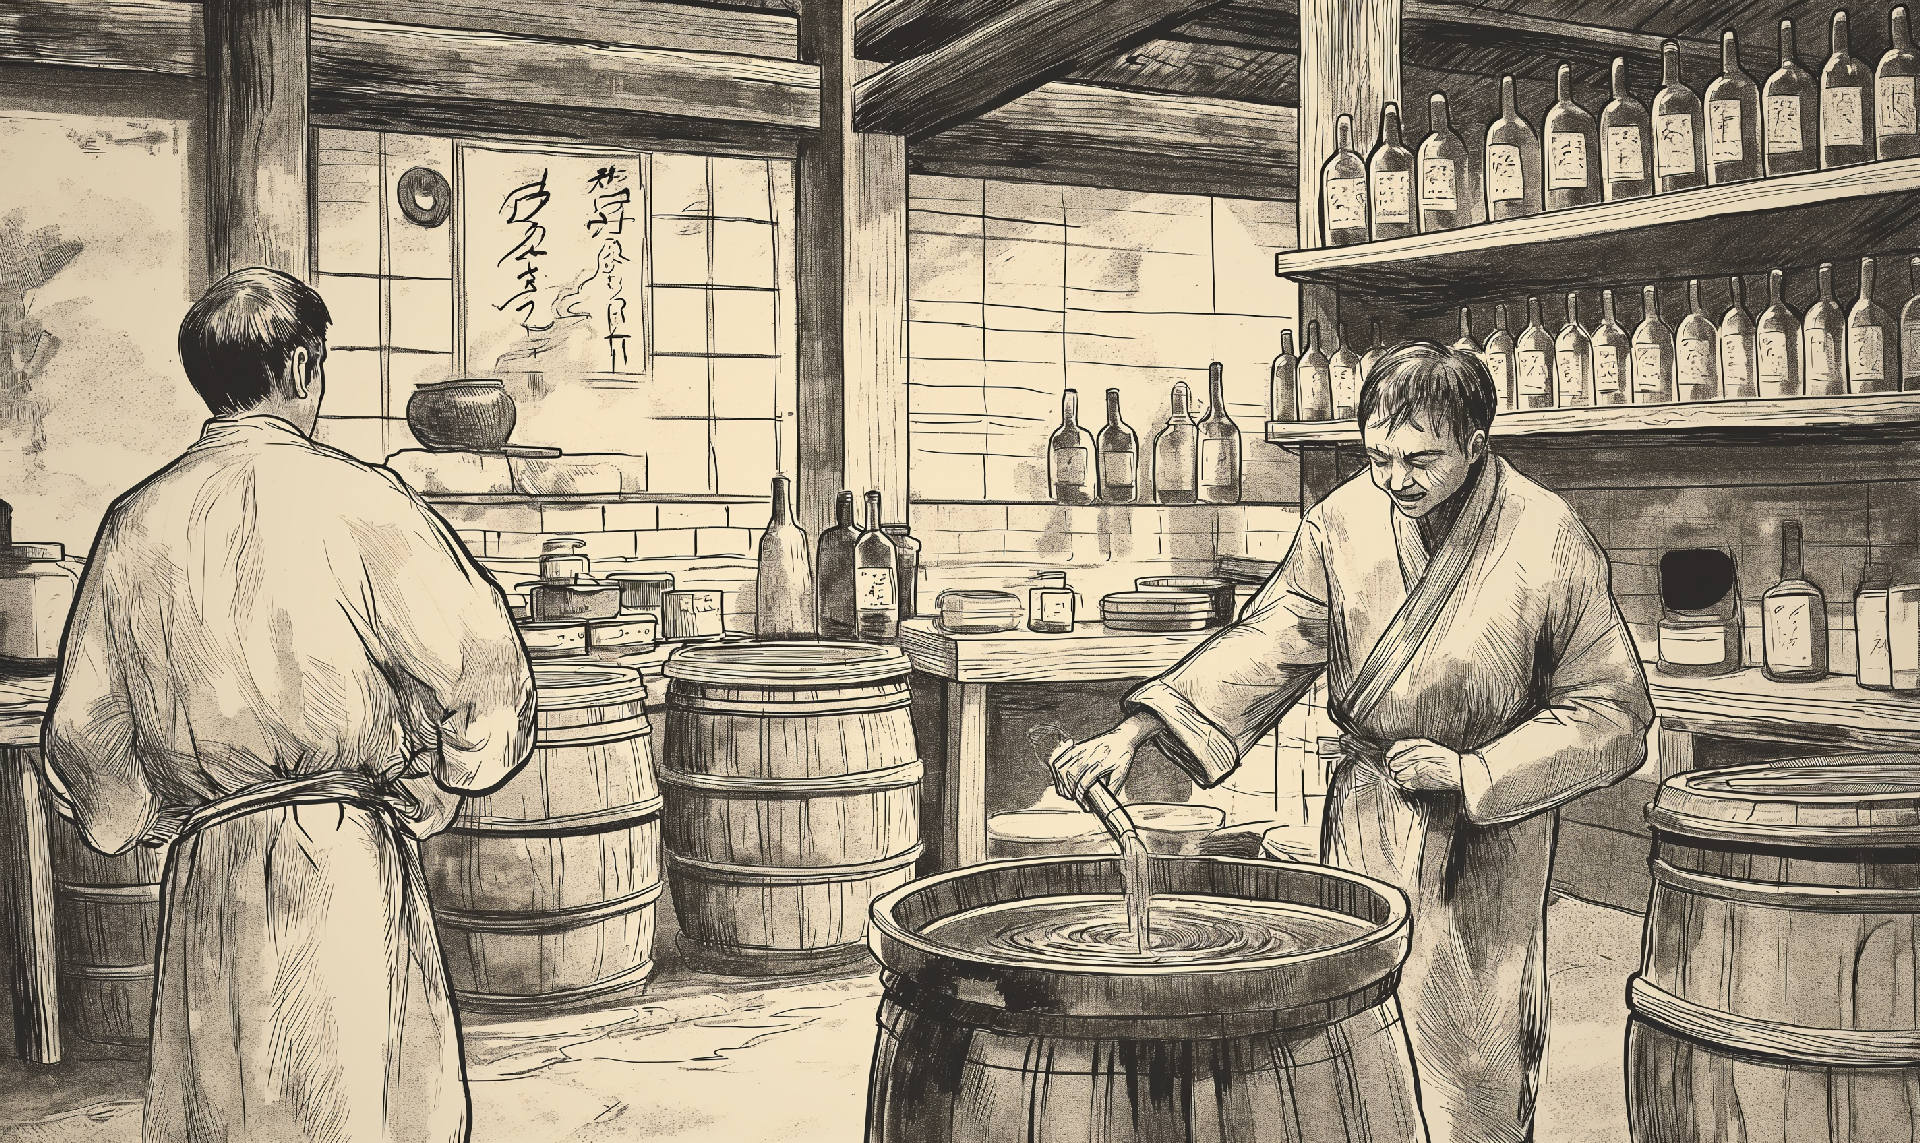 An Illustration of the intricate process of brewing Shaoxing Wine in a traditional Chinese brewery. Credit: Merasturda Enkeste